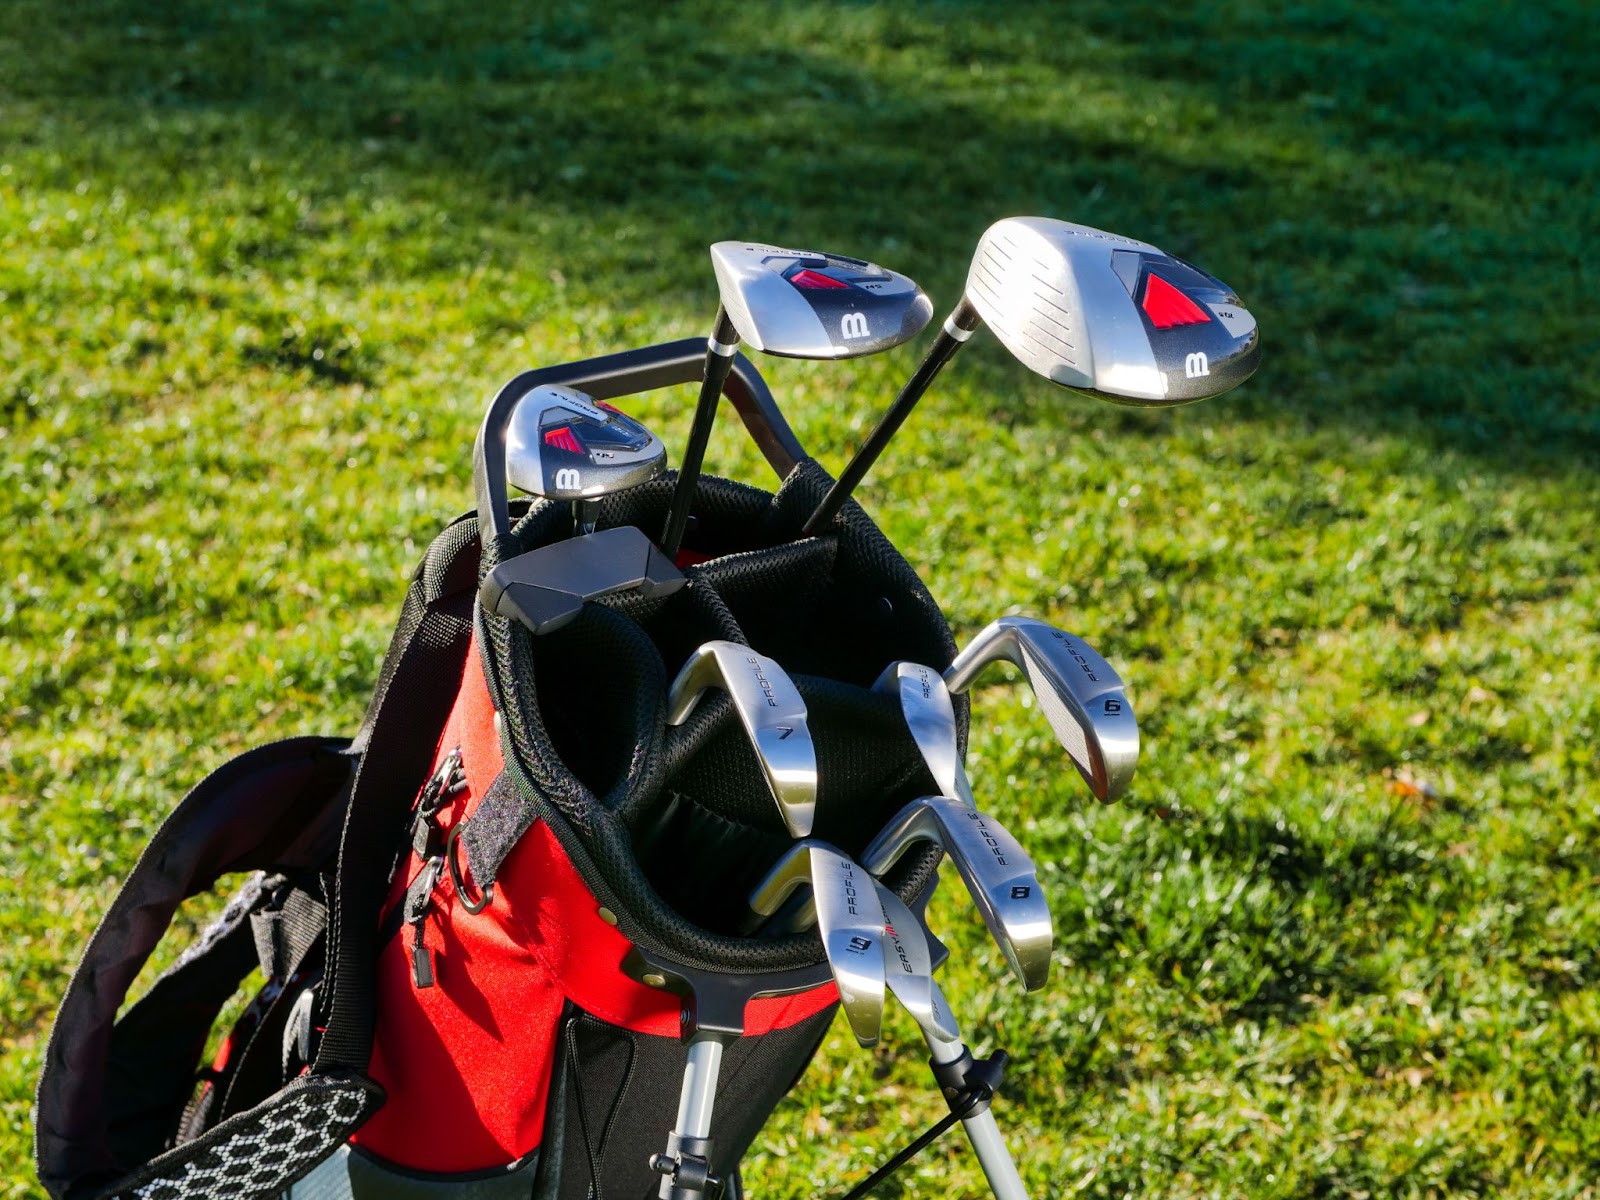 Golf bag with club can help improve your score at any age